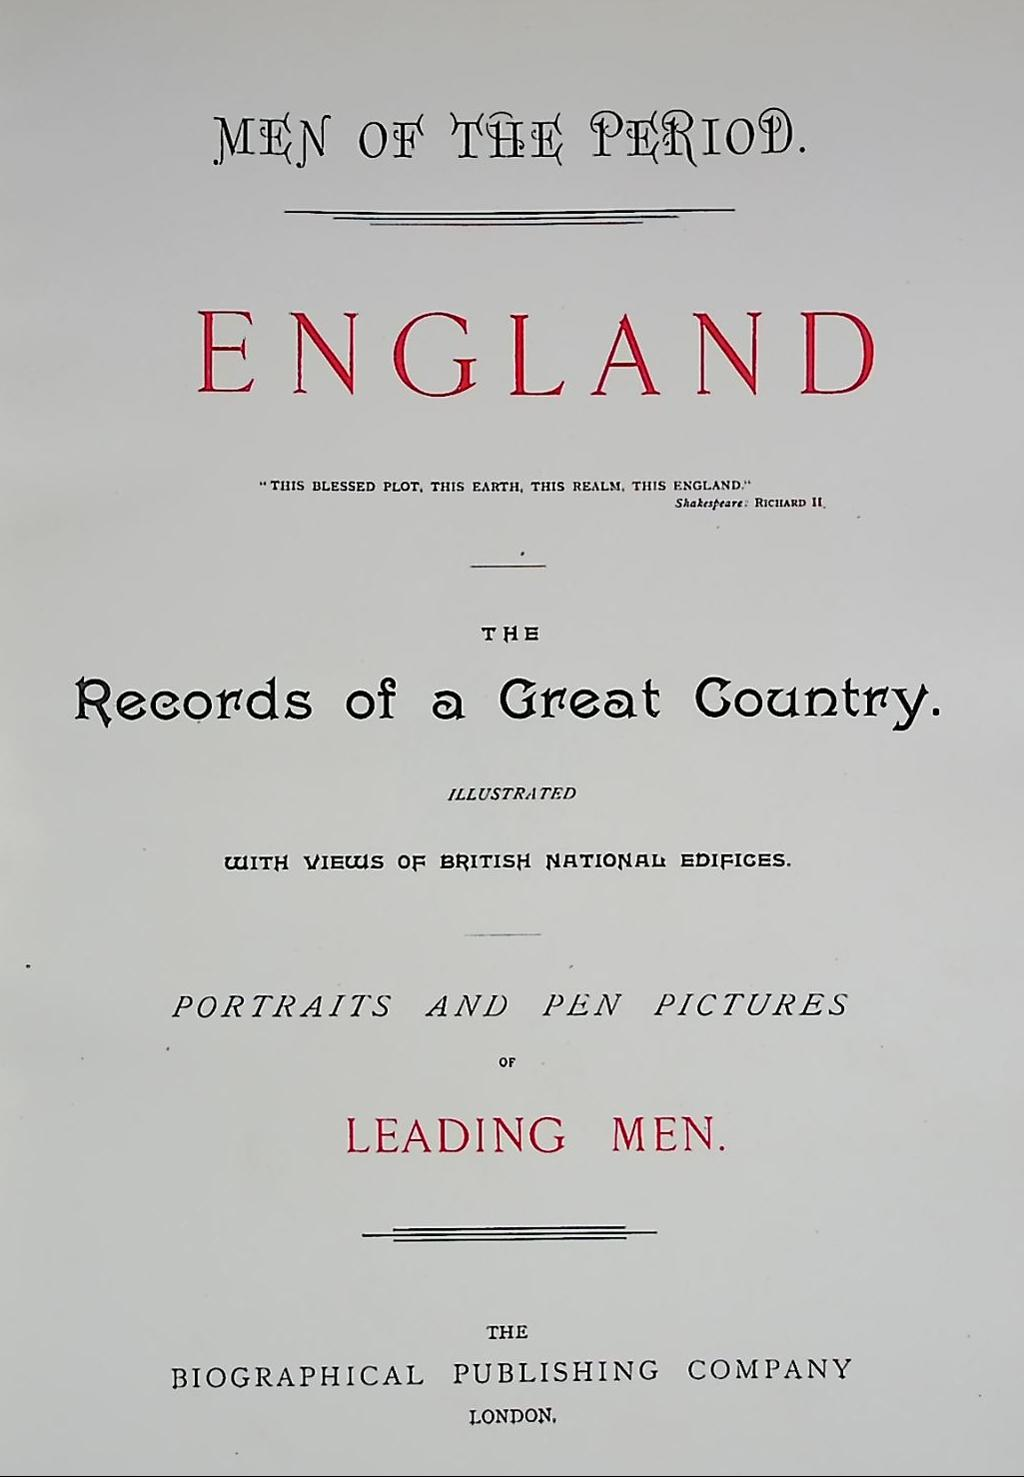 Men of the Period. England. Records of a Great Country. Portraits and Pen Pictures of Leading Men.